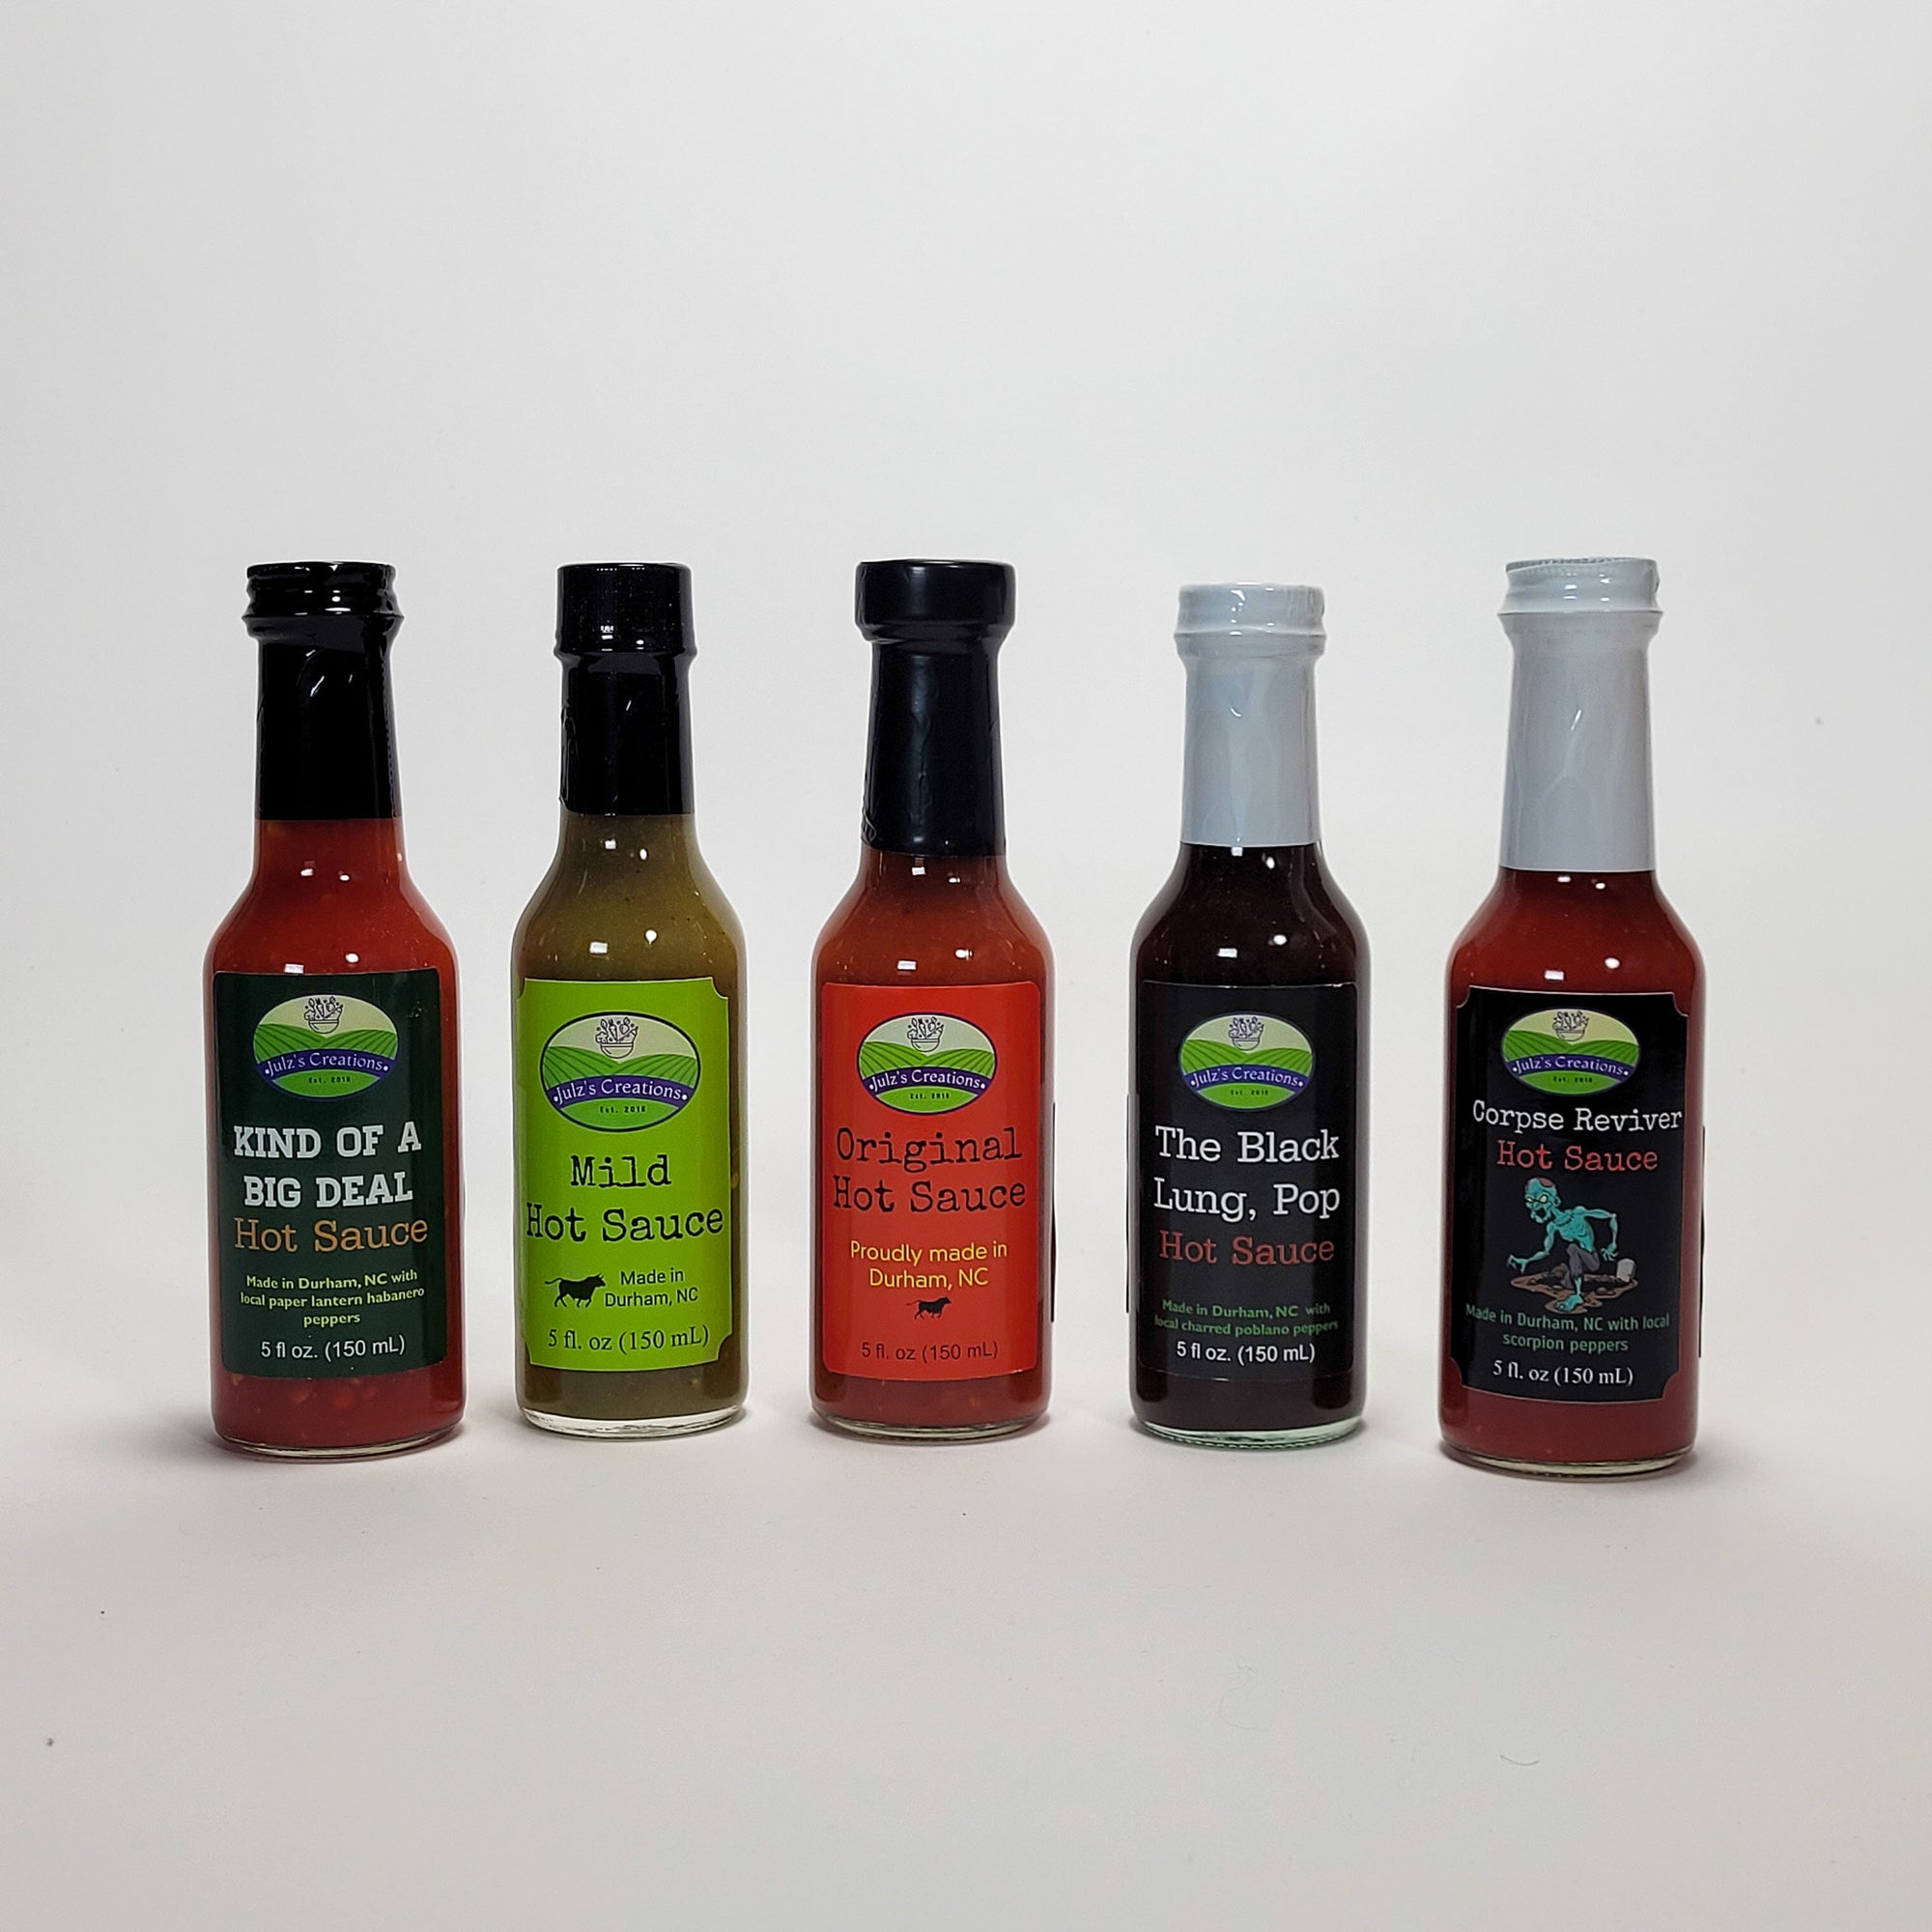 Julz's Creations hot sauce collection